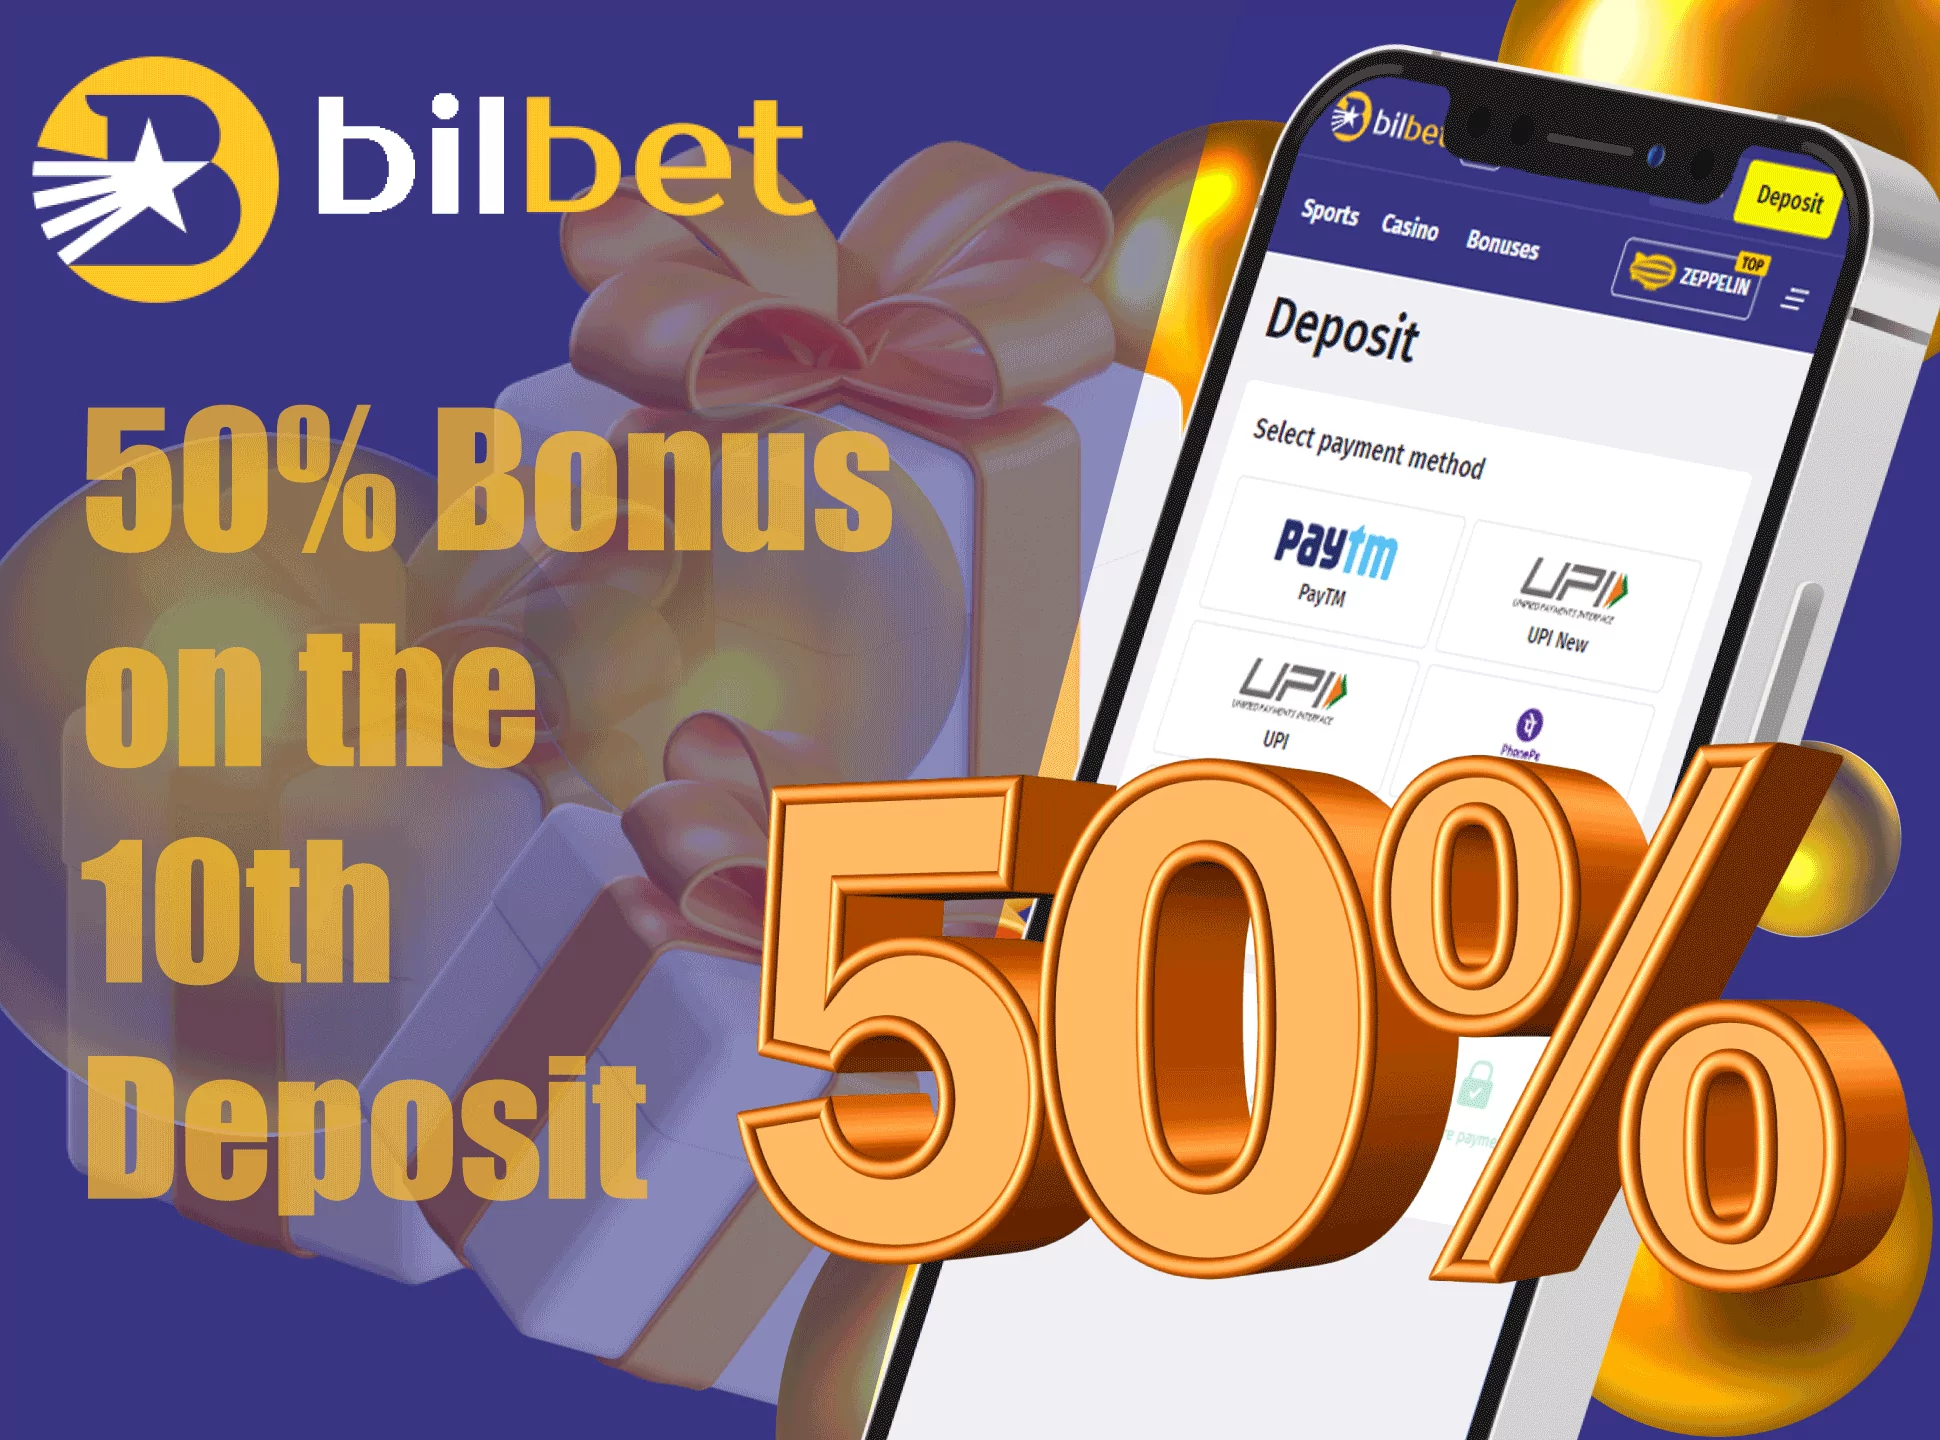 You can also receive 50% after your 10 deposit at Bilbet.